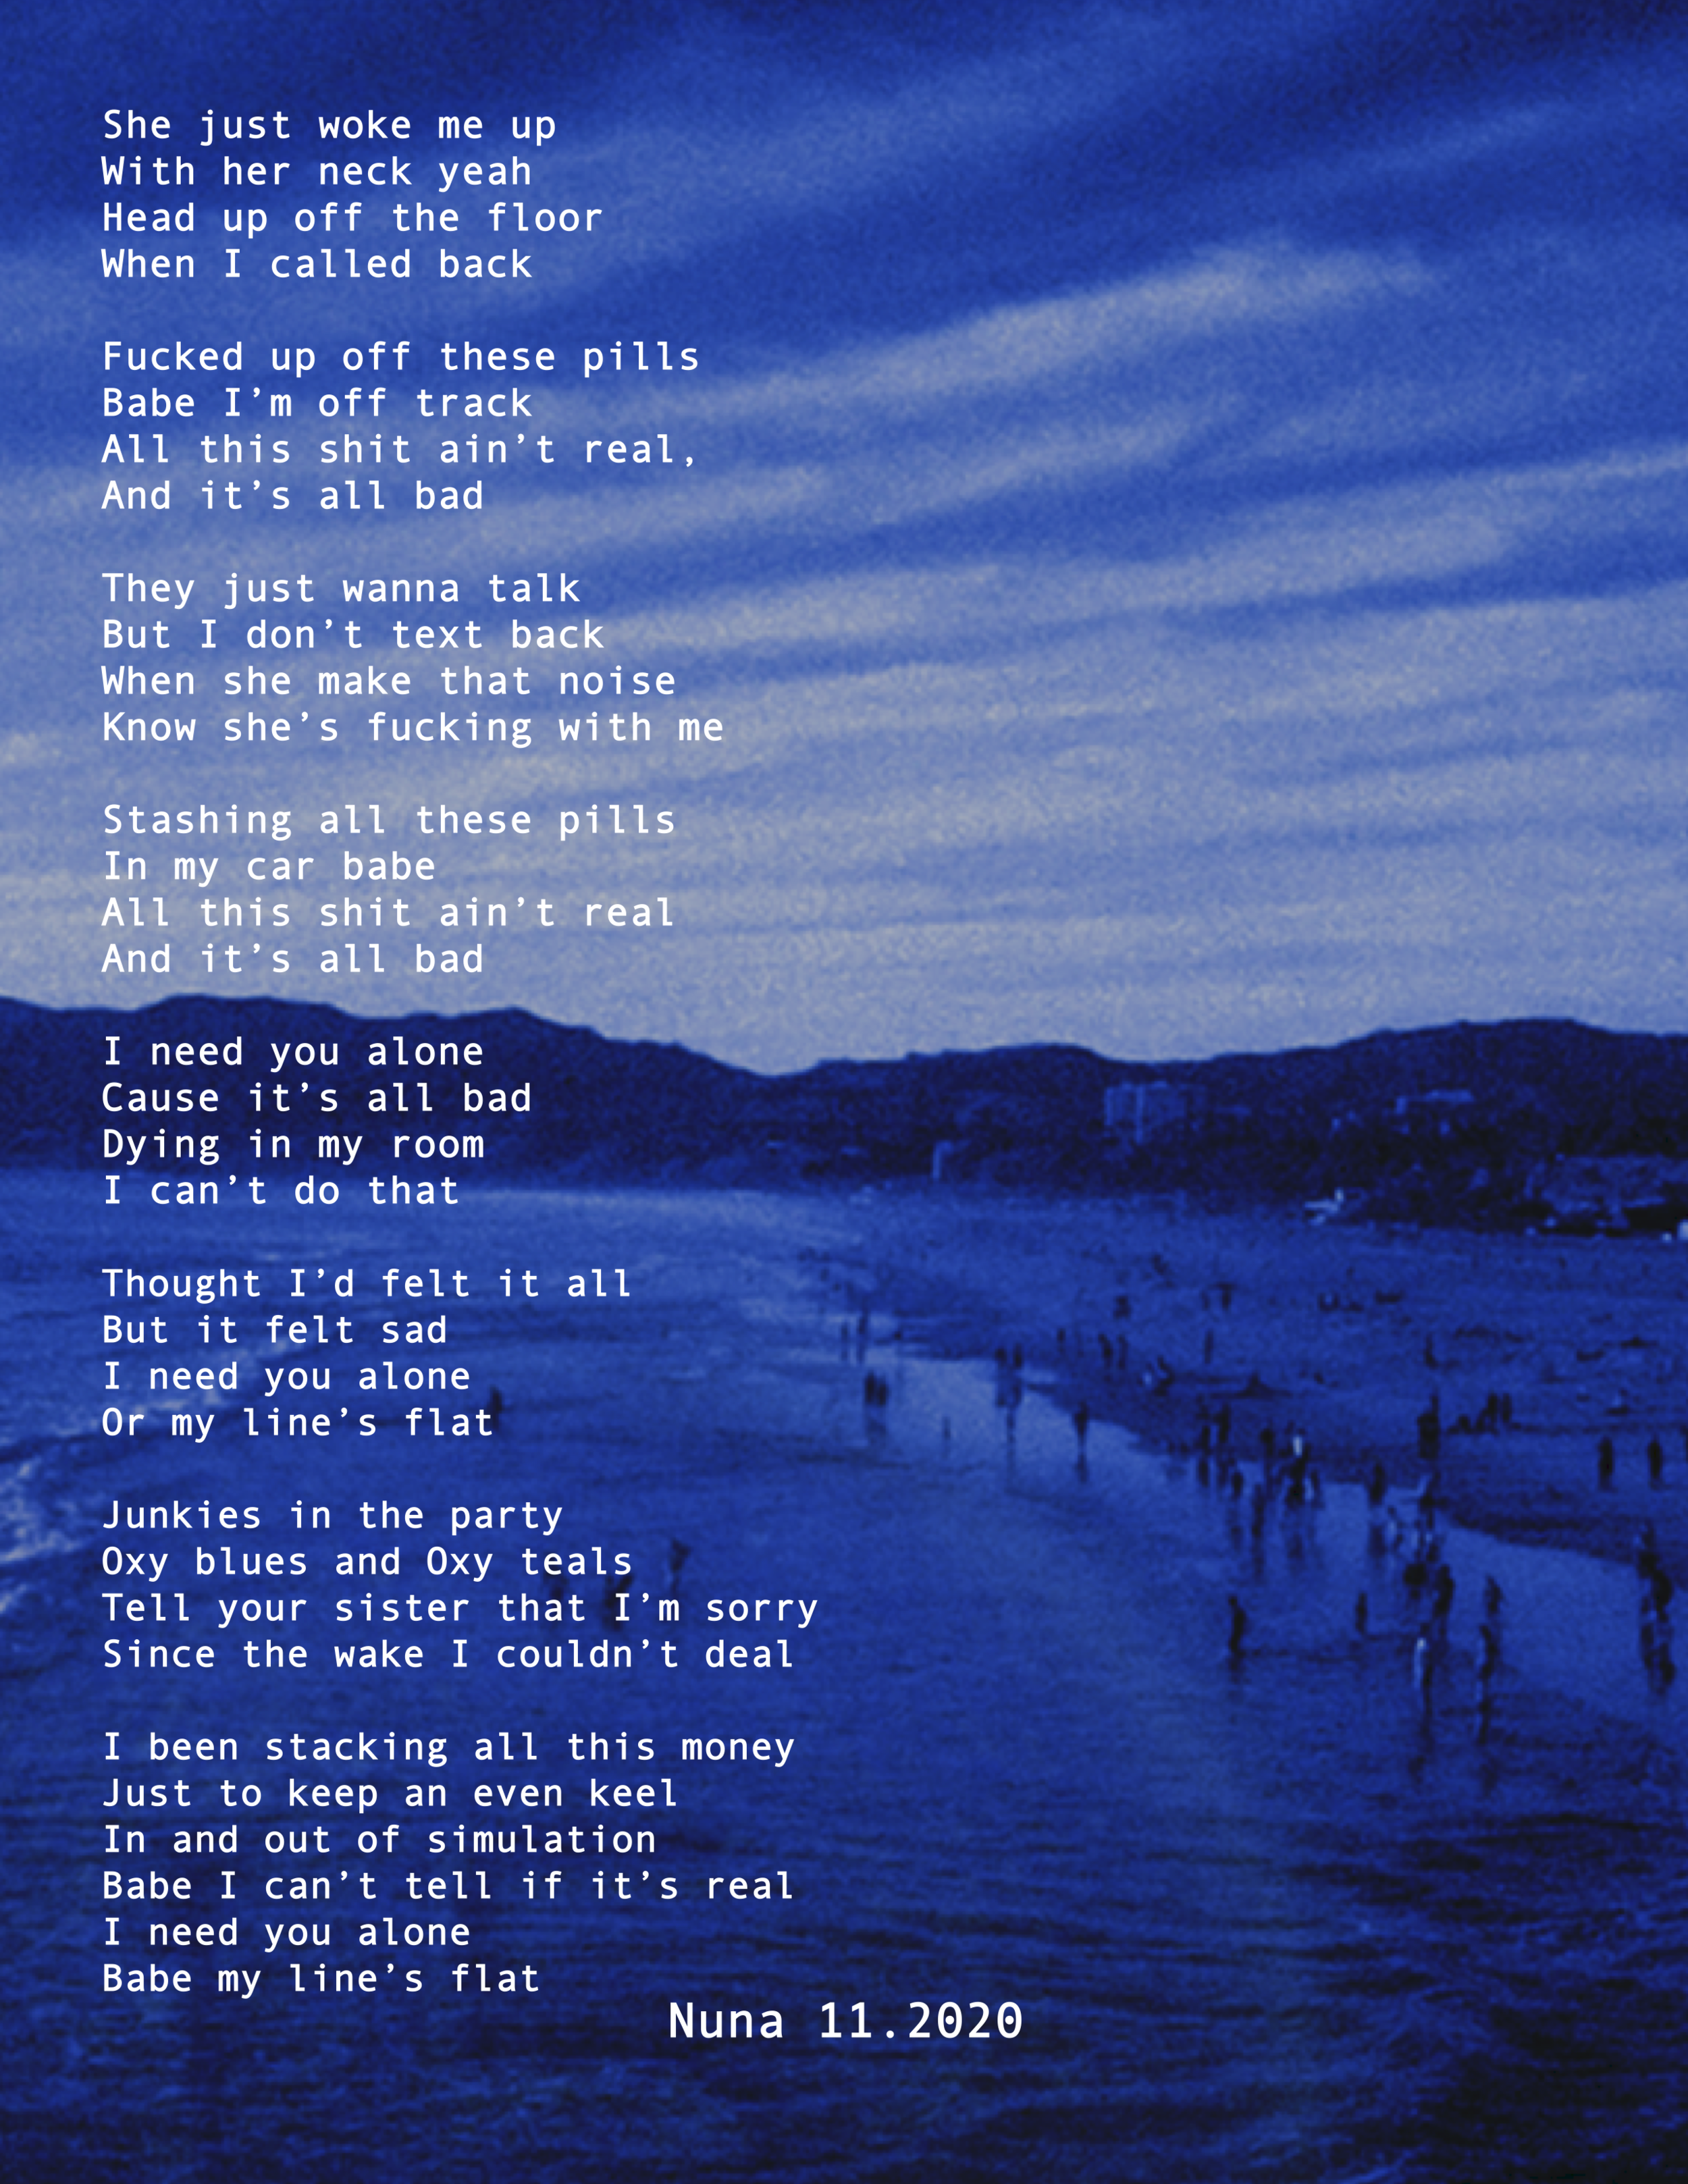 Page 2 Bohemian Grove Baby (Flatliners) Lyric Sheet-2 (dragged).png